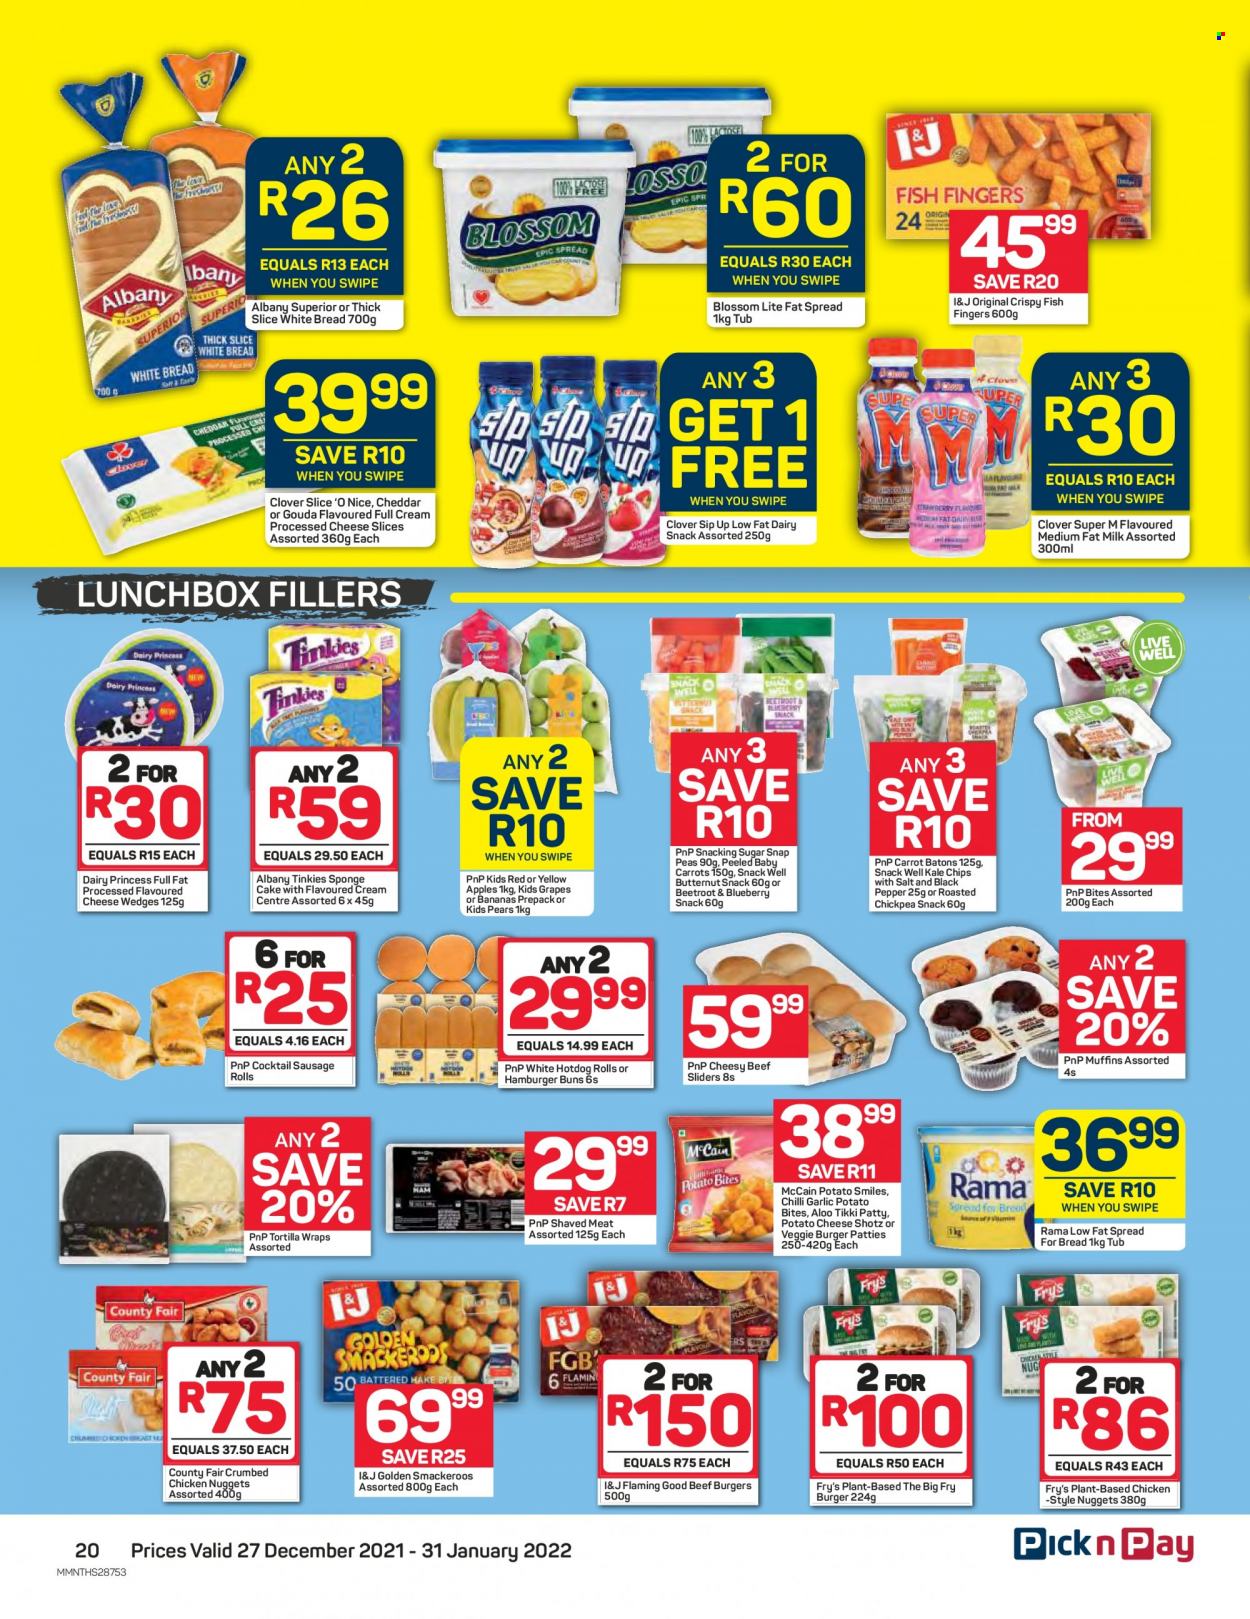 Pick n Pay specials - 12.27.2021 - 01.31.2022. 